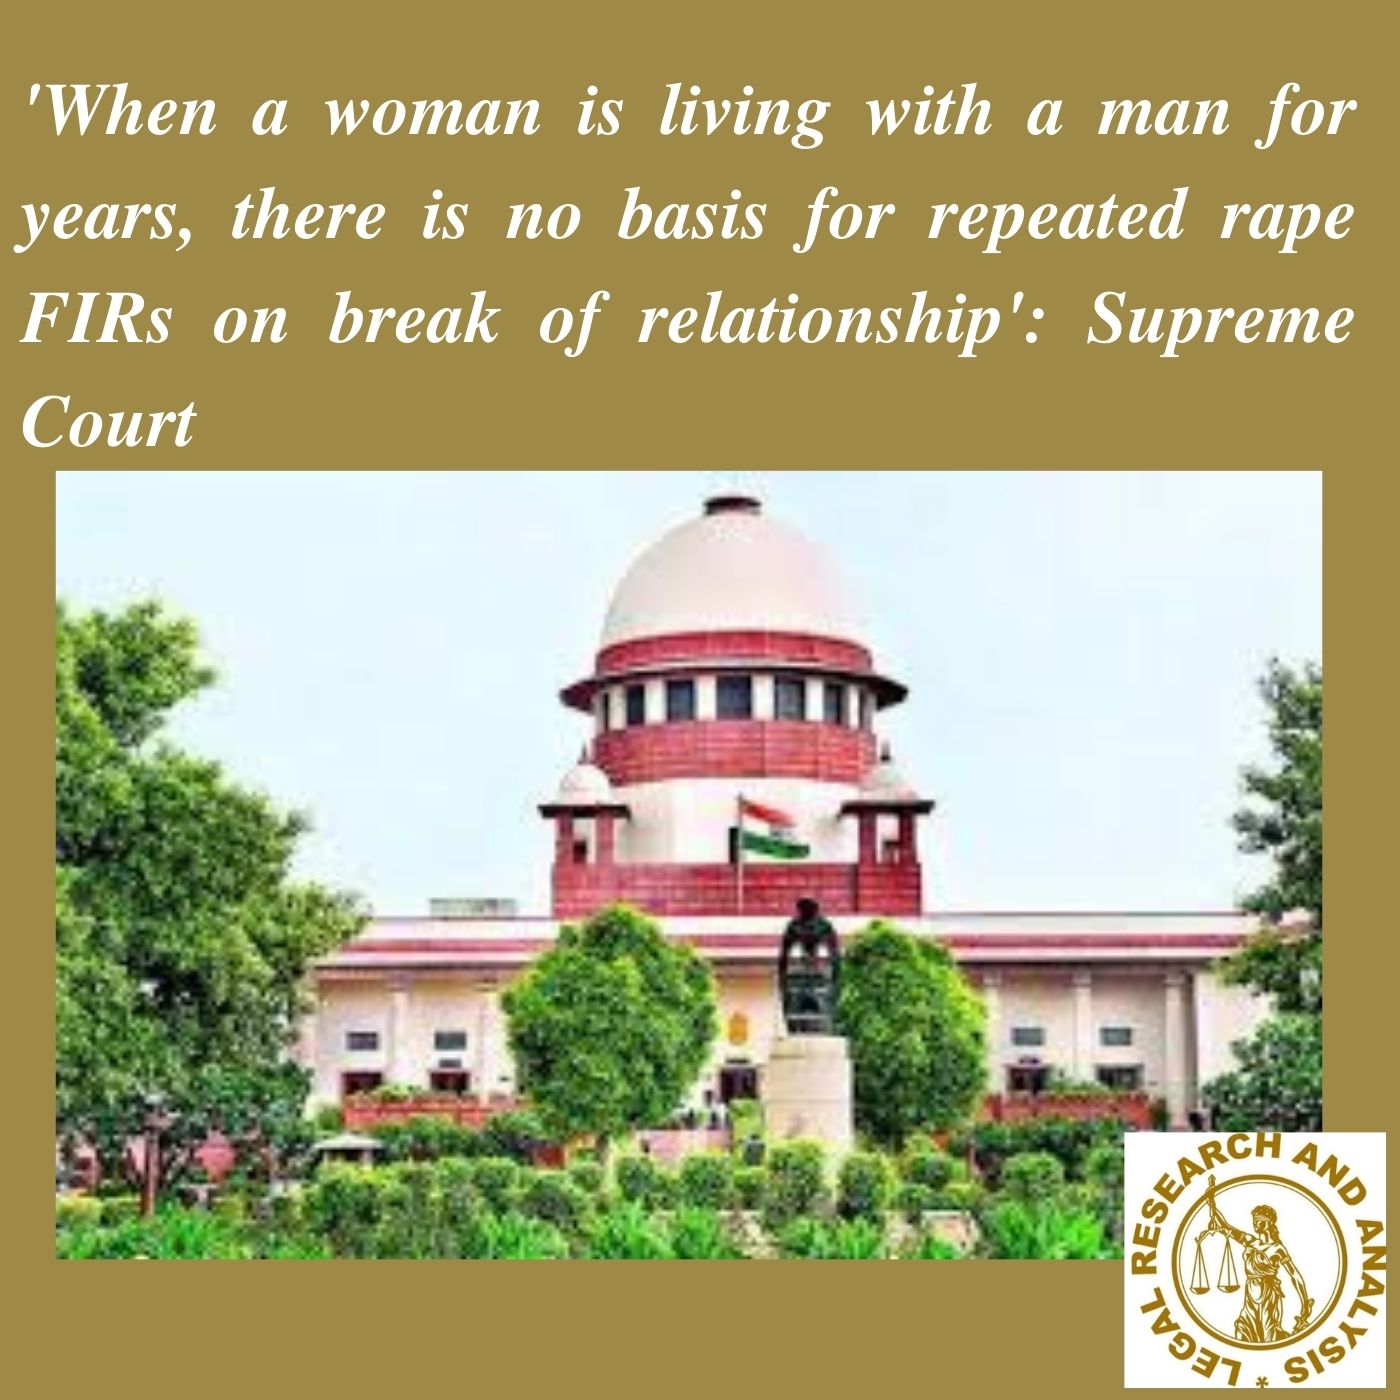 'When a woman is living with a man for years, there is no basis for repeated rape FIRs on the break of relationship': Supreme Court